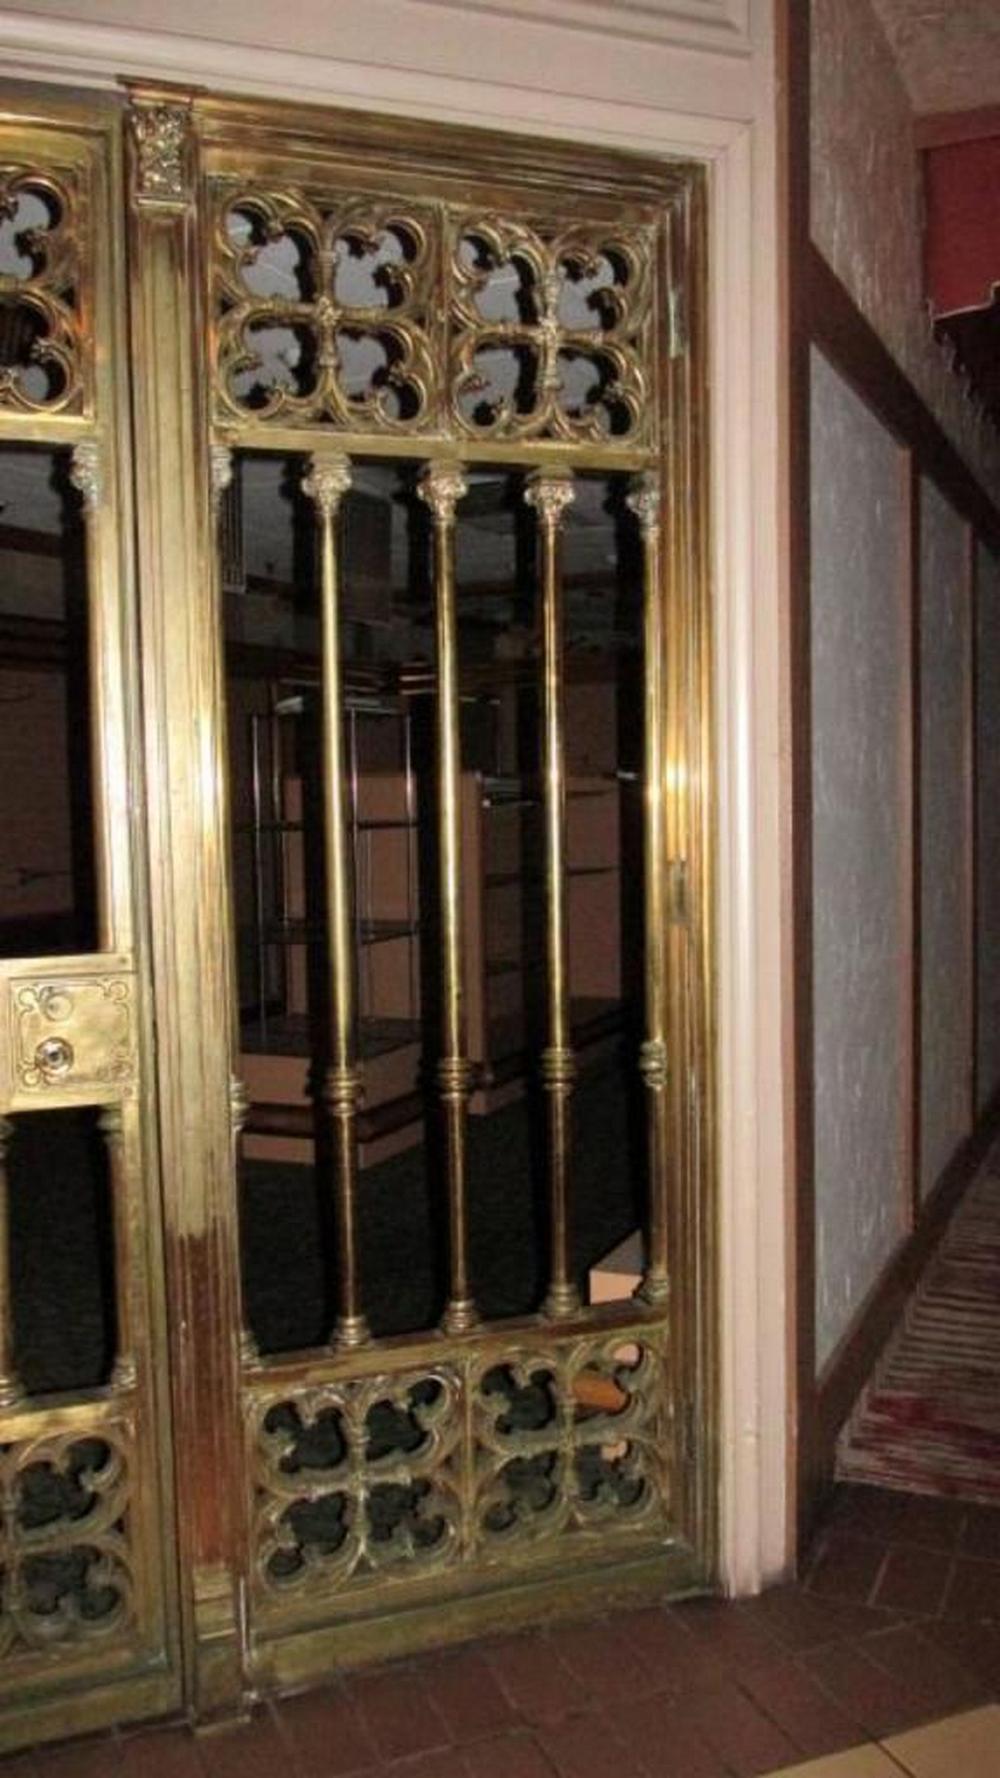 Turn of the century, Gothic Revival, three-piece heavy cast bronze bank gate storefront is very ornate, extremely heavy, locking but lock is not present. Removed from Ohio Citizens Bank in Downtown Toledo, entrance to vault. Wear as expected with